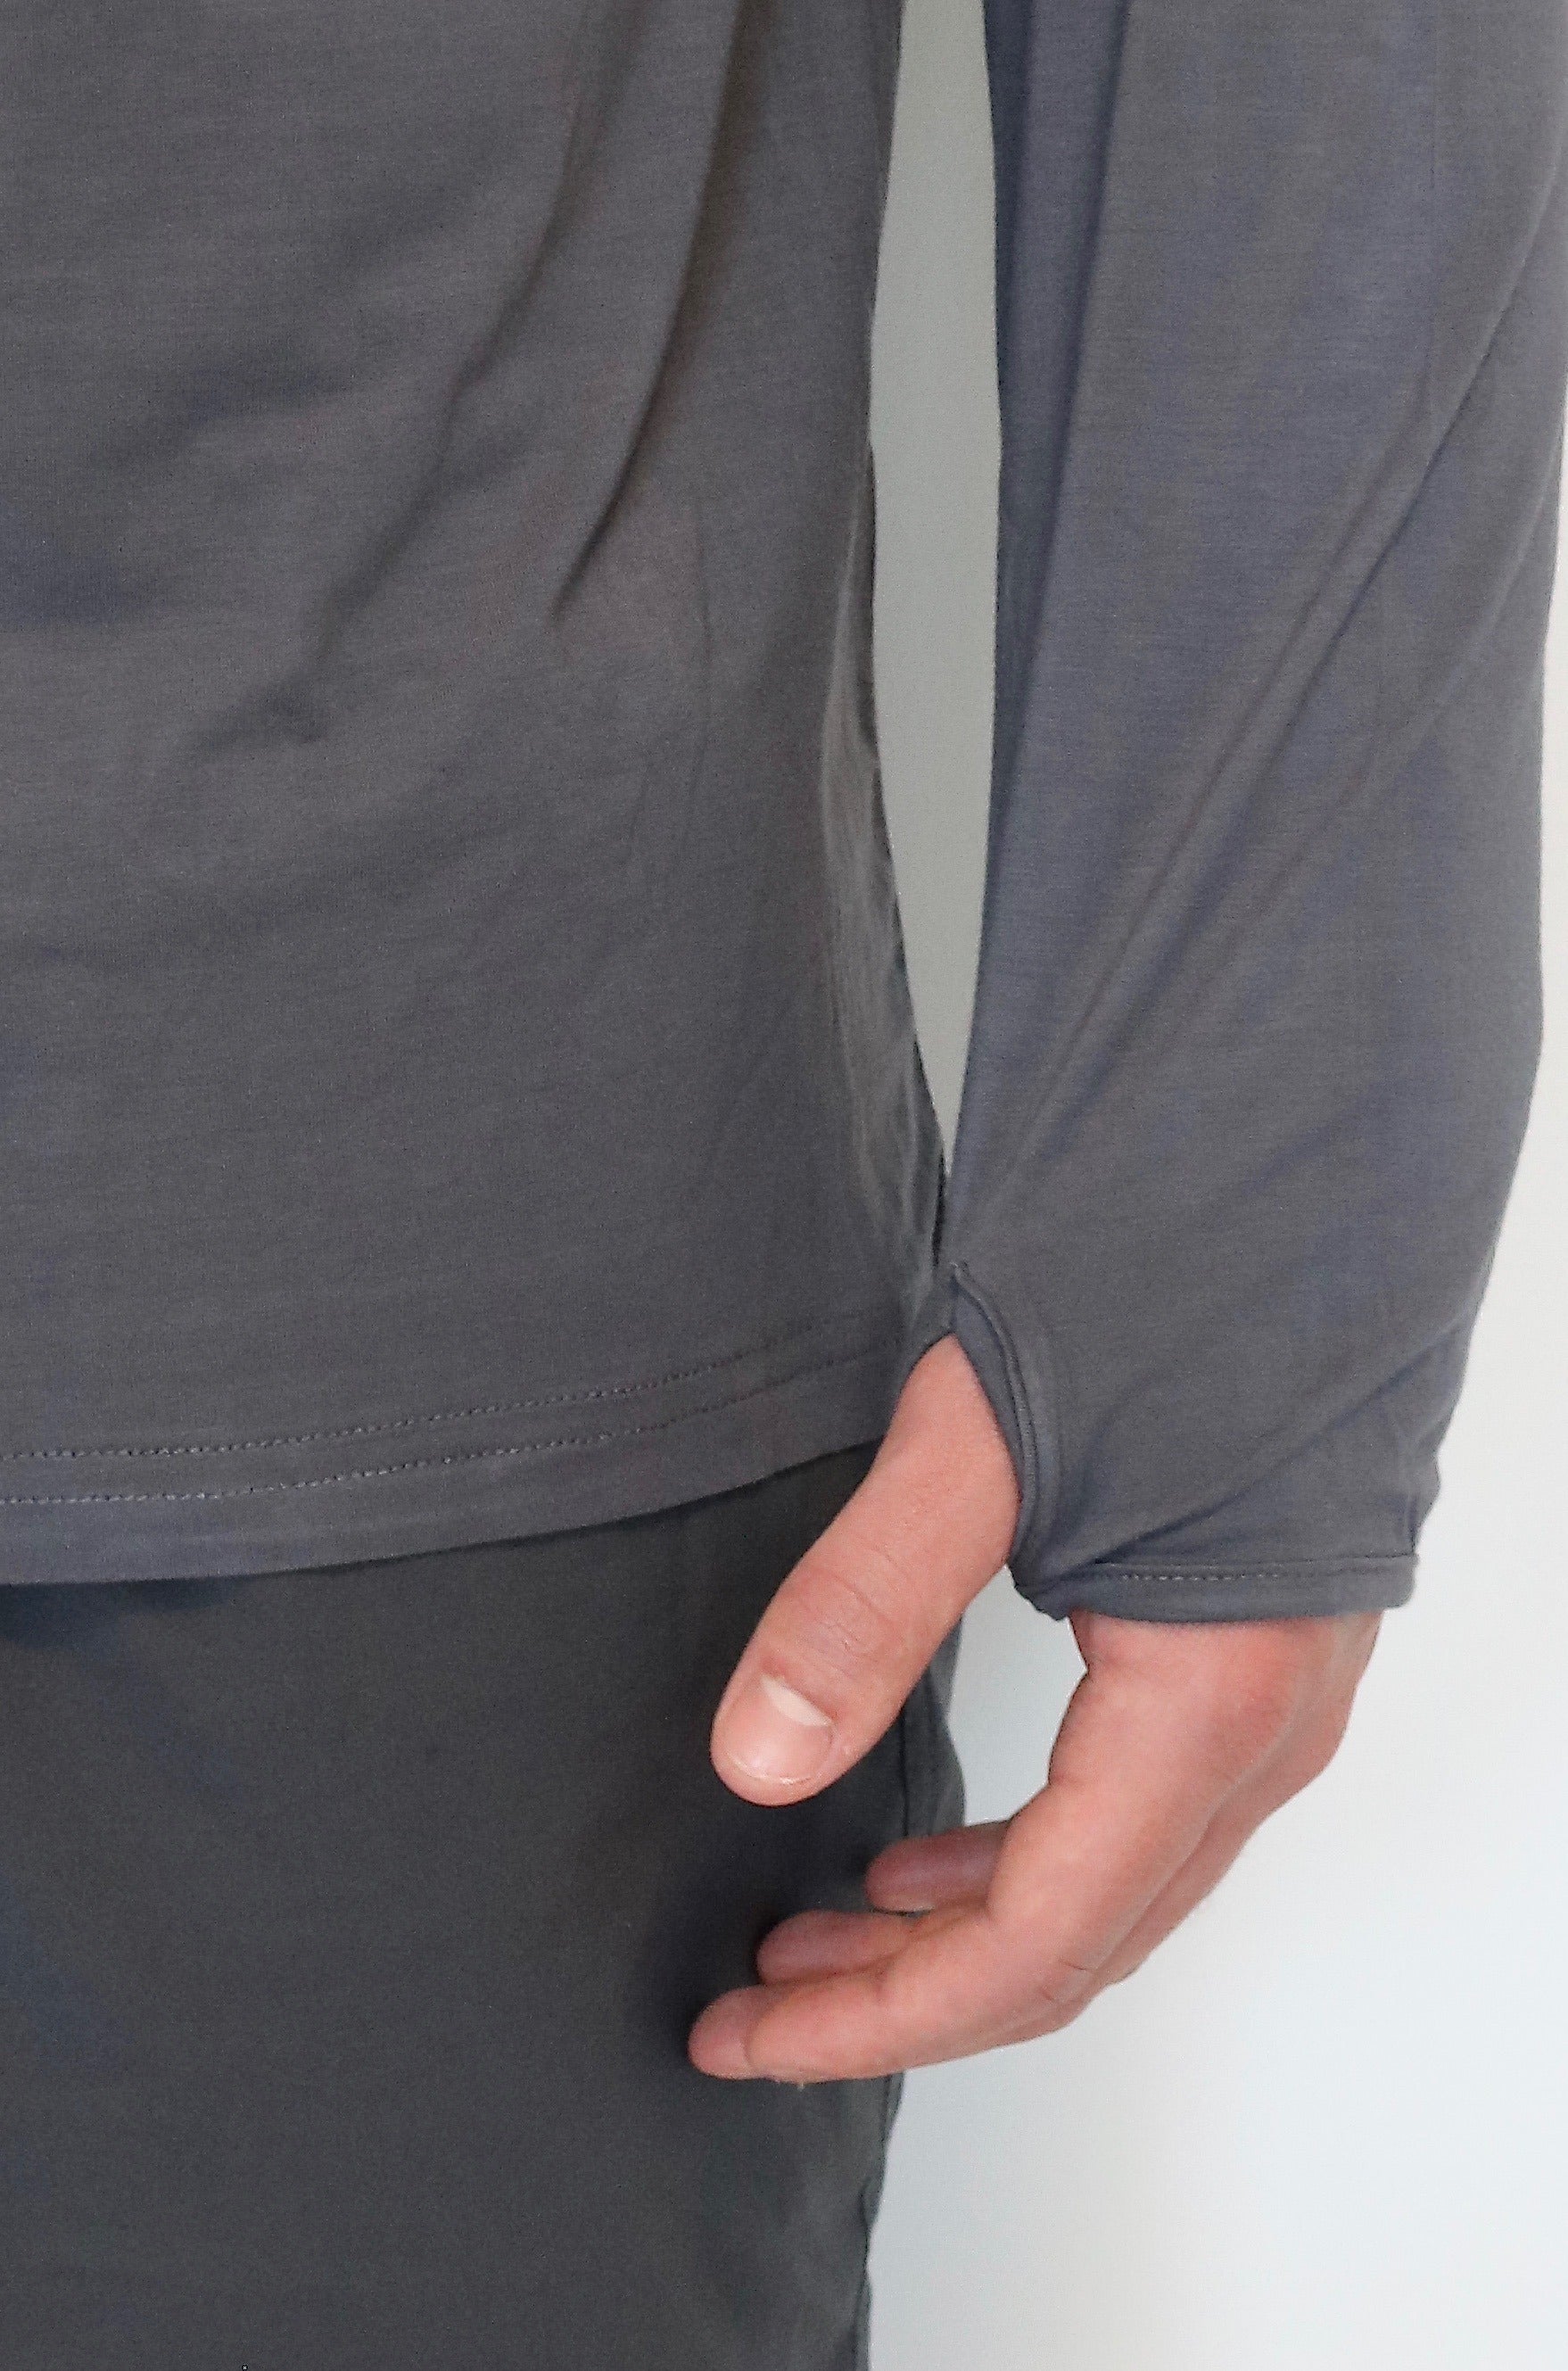 Thumbhole of the Angler Crossover Bamboo Hoodie. This lightweight sun hoodie provides 35+ UPF sun protection.